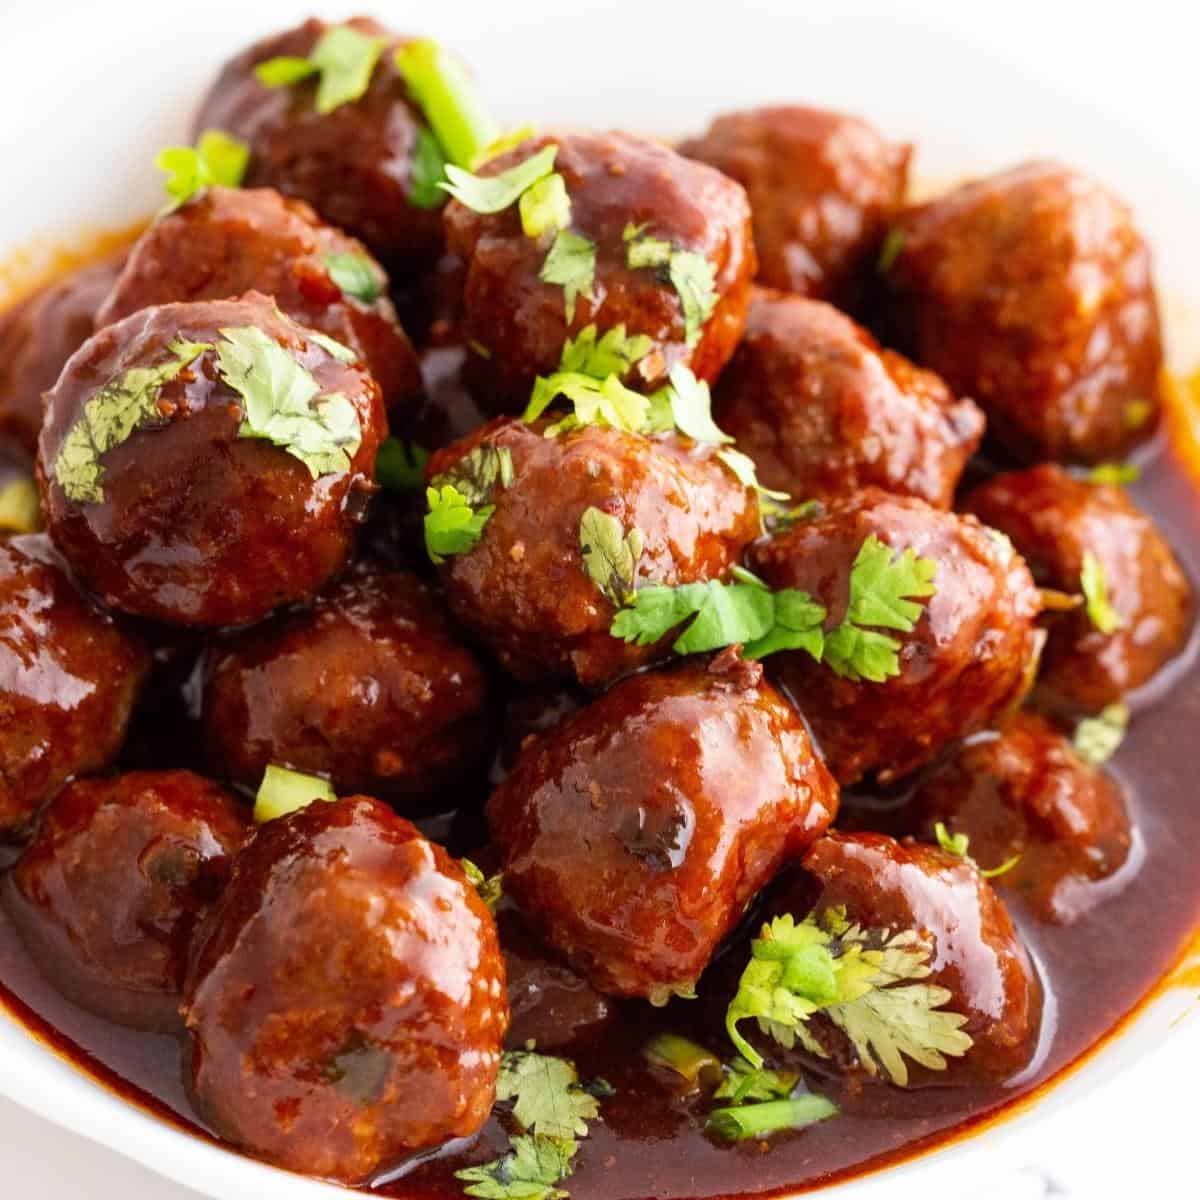 A bowl with meatballs in sweet and sour sauce.